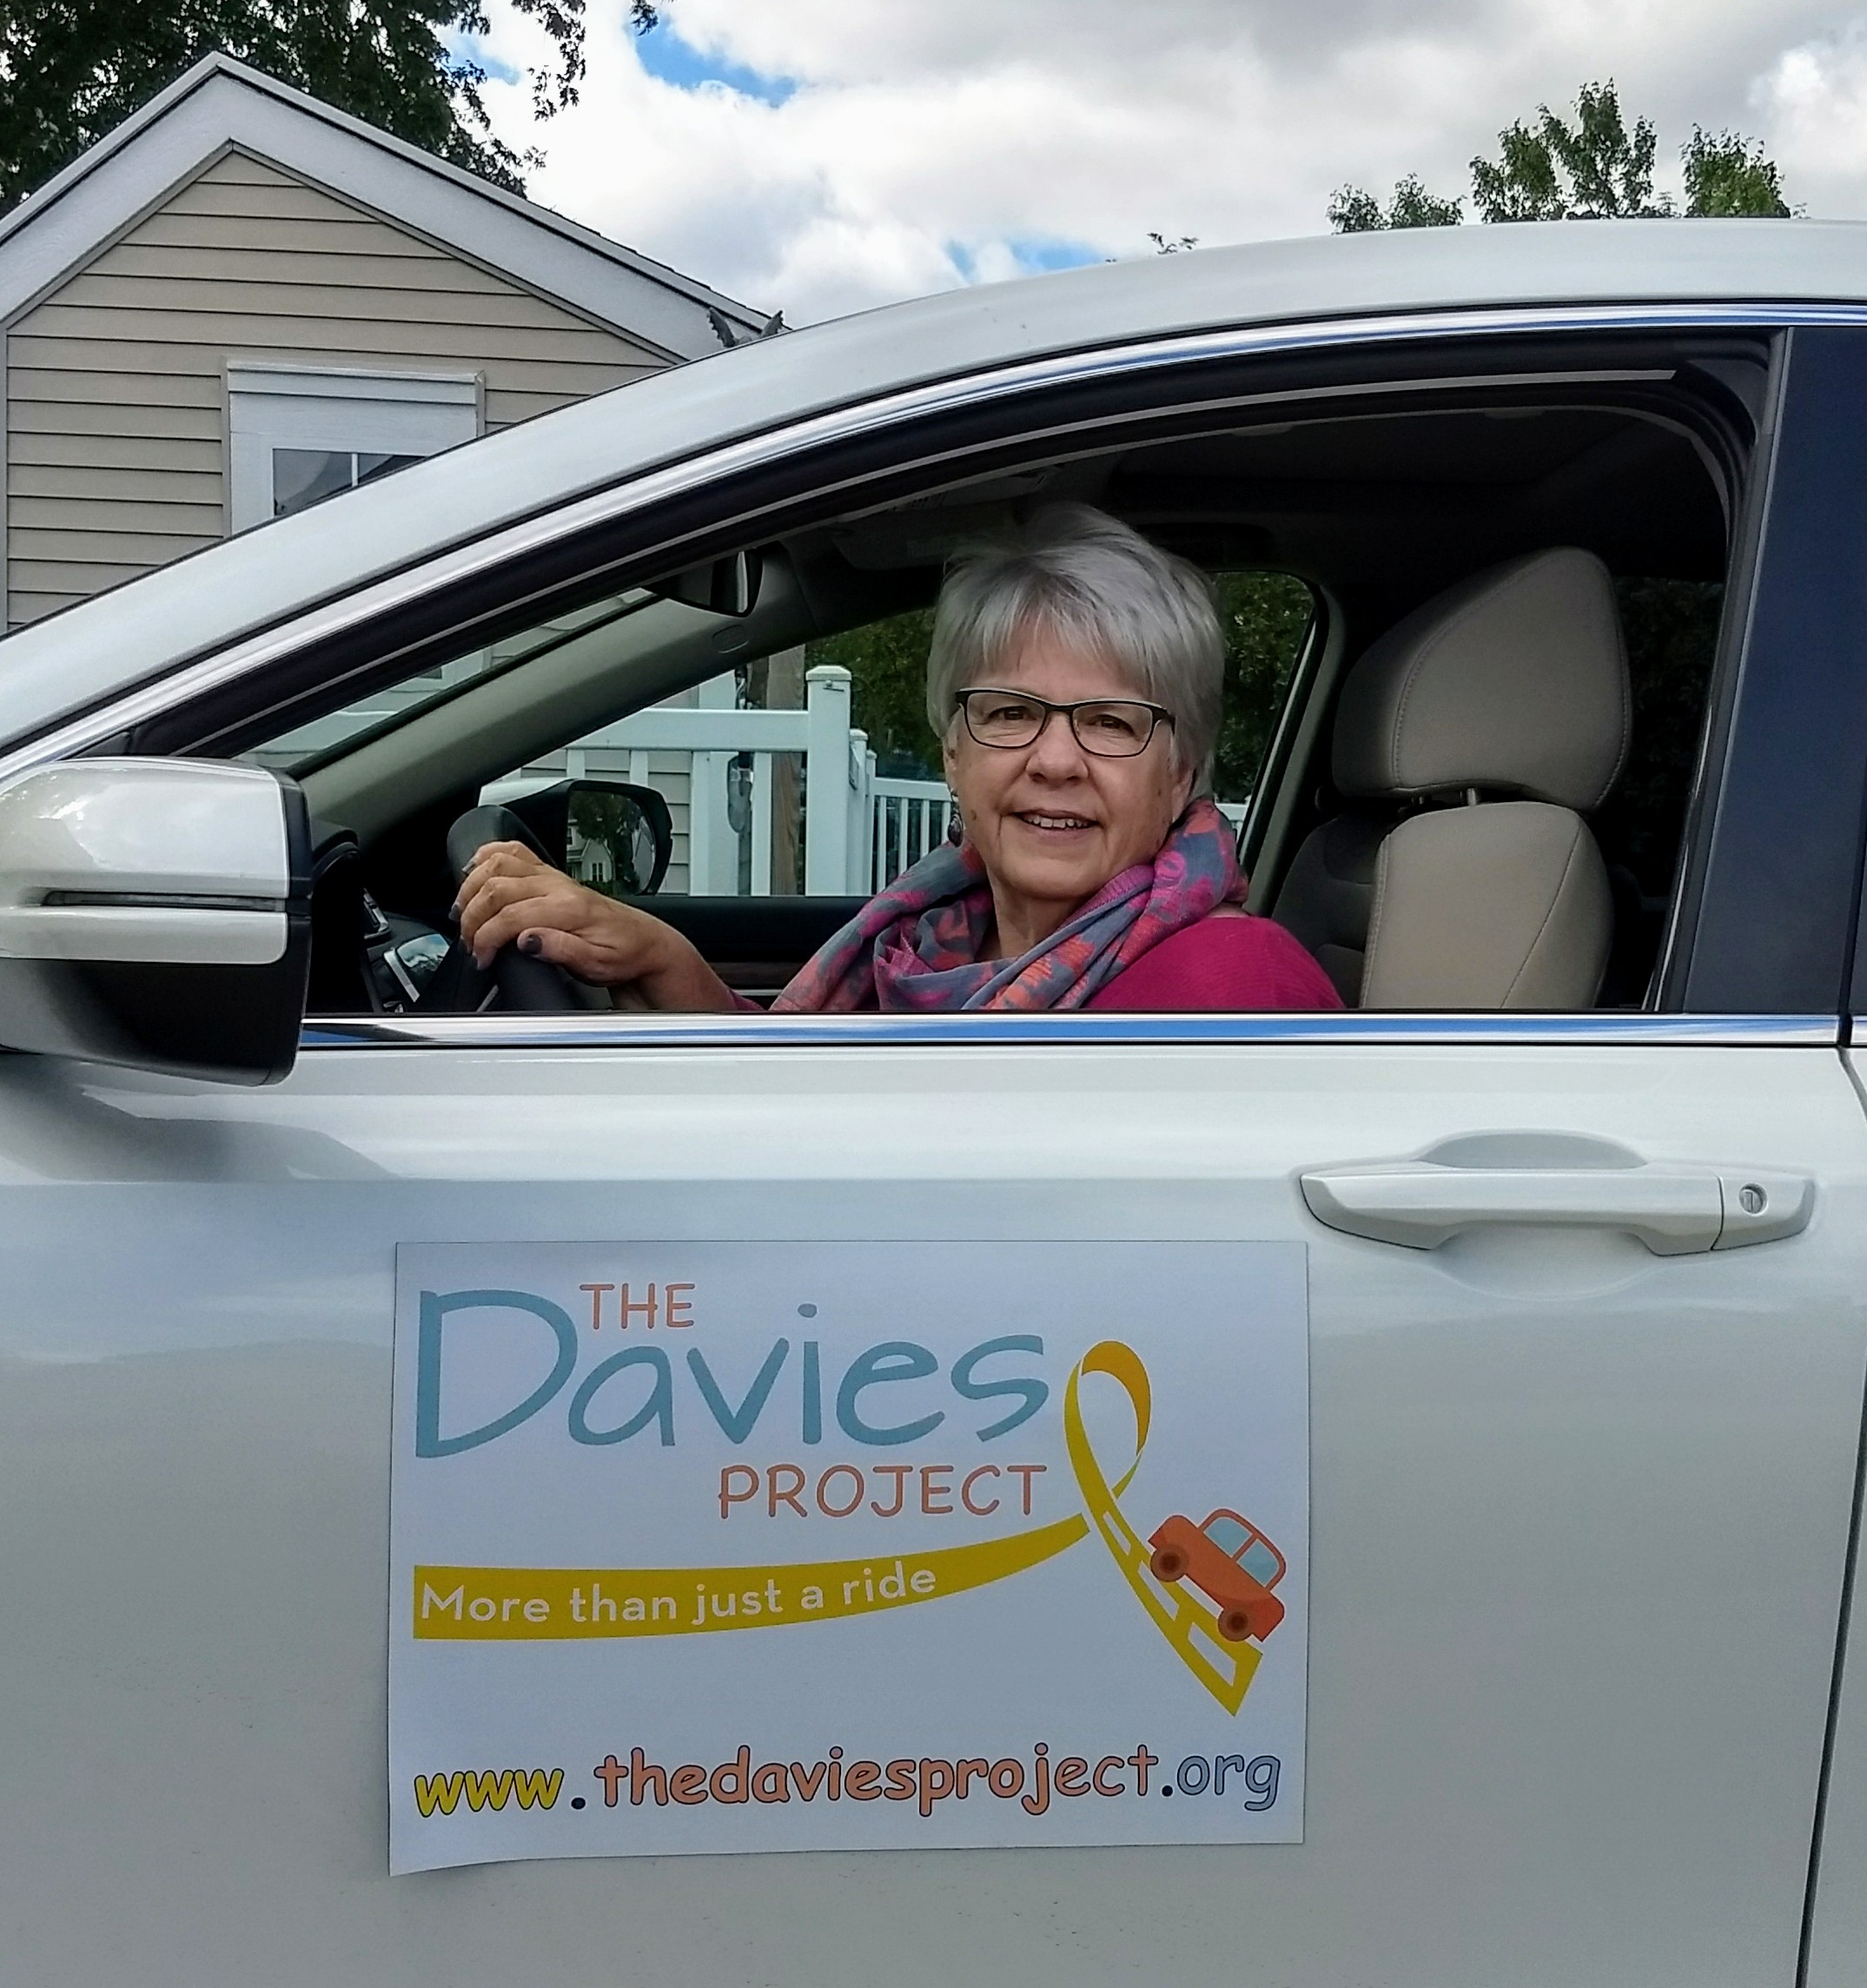 Driver in car with The Davies Project logo on car door